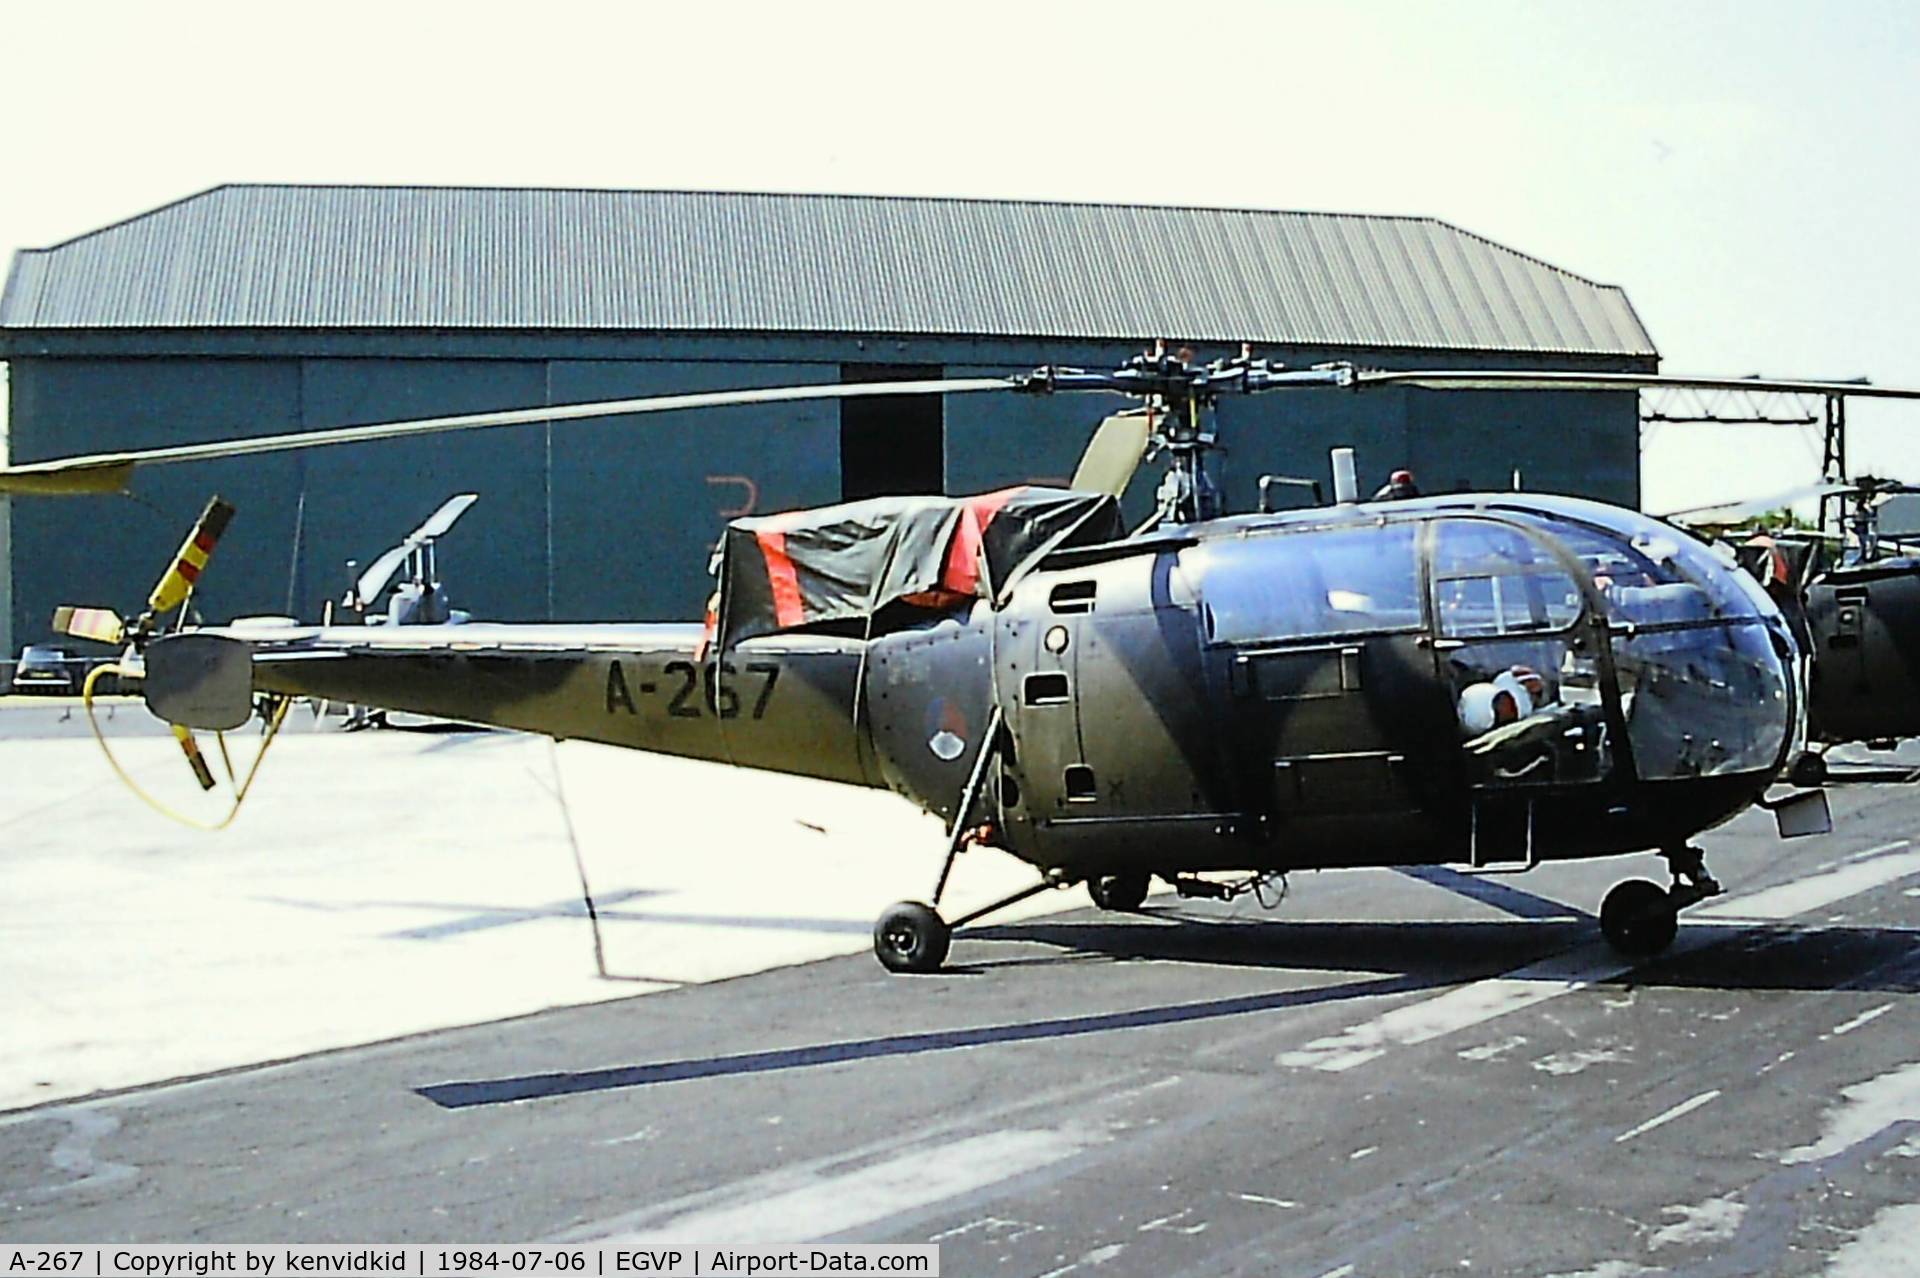 A-267, 1965 Aérospatiale SE-3160 Alouette III C/N 1267, At the 1984 Middle Wallop air show.